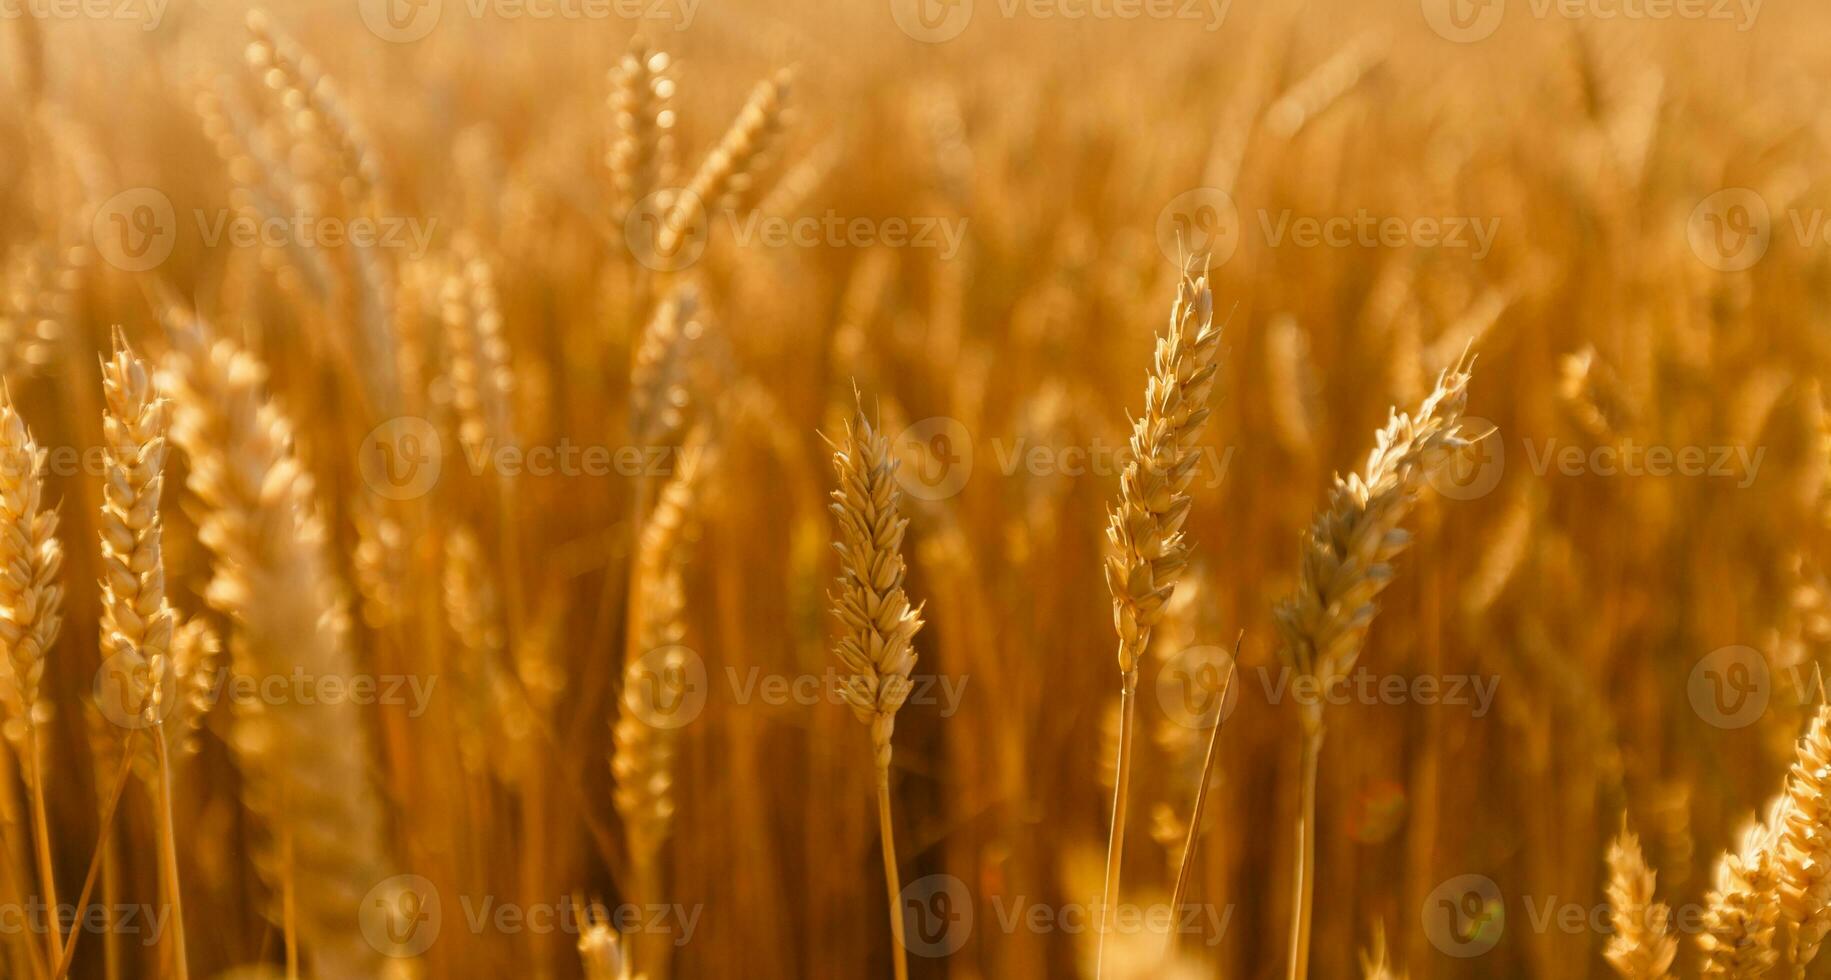 Amazing agriculture sunset landscape.Growth nature harvest. Wheat field natural product. Ears of golden wheat close up. Rural scene under sunlight. Summer background of ripening ears of landscape. photo